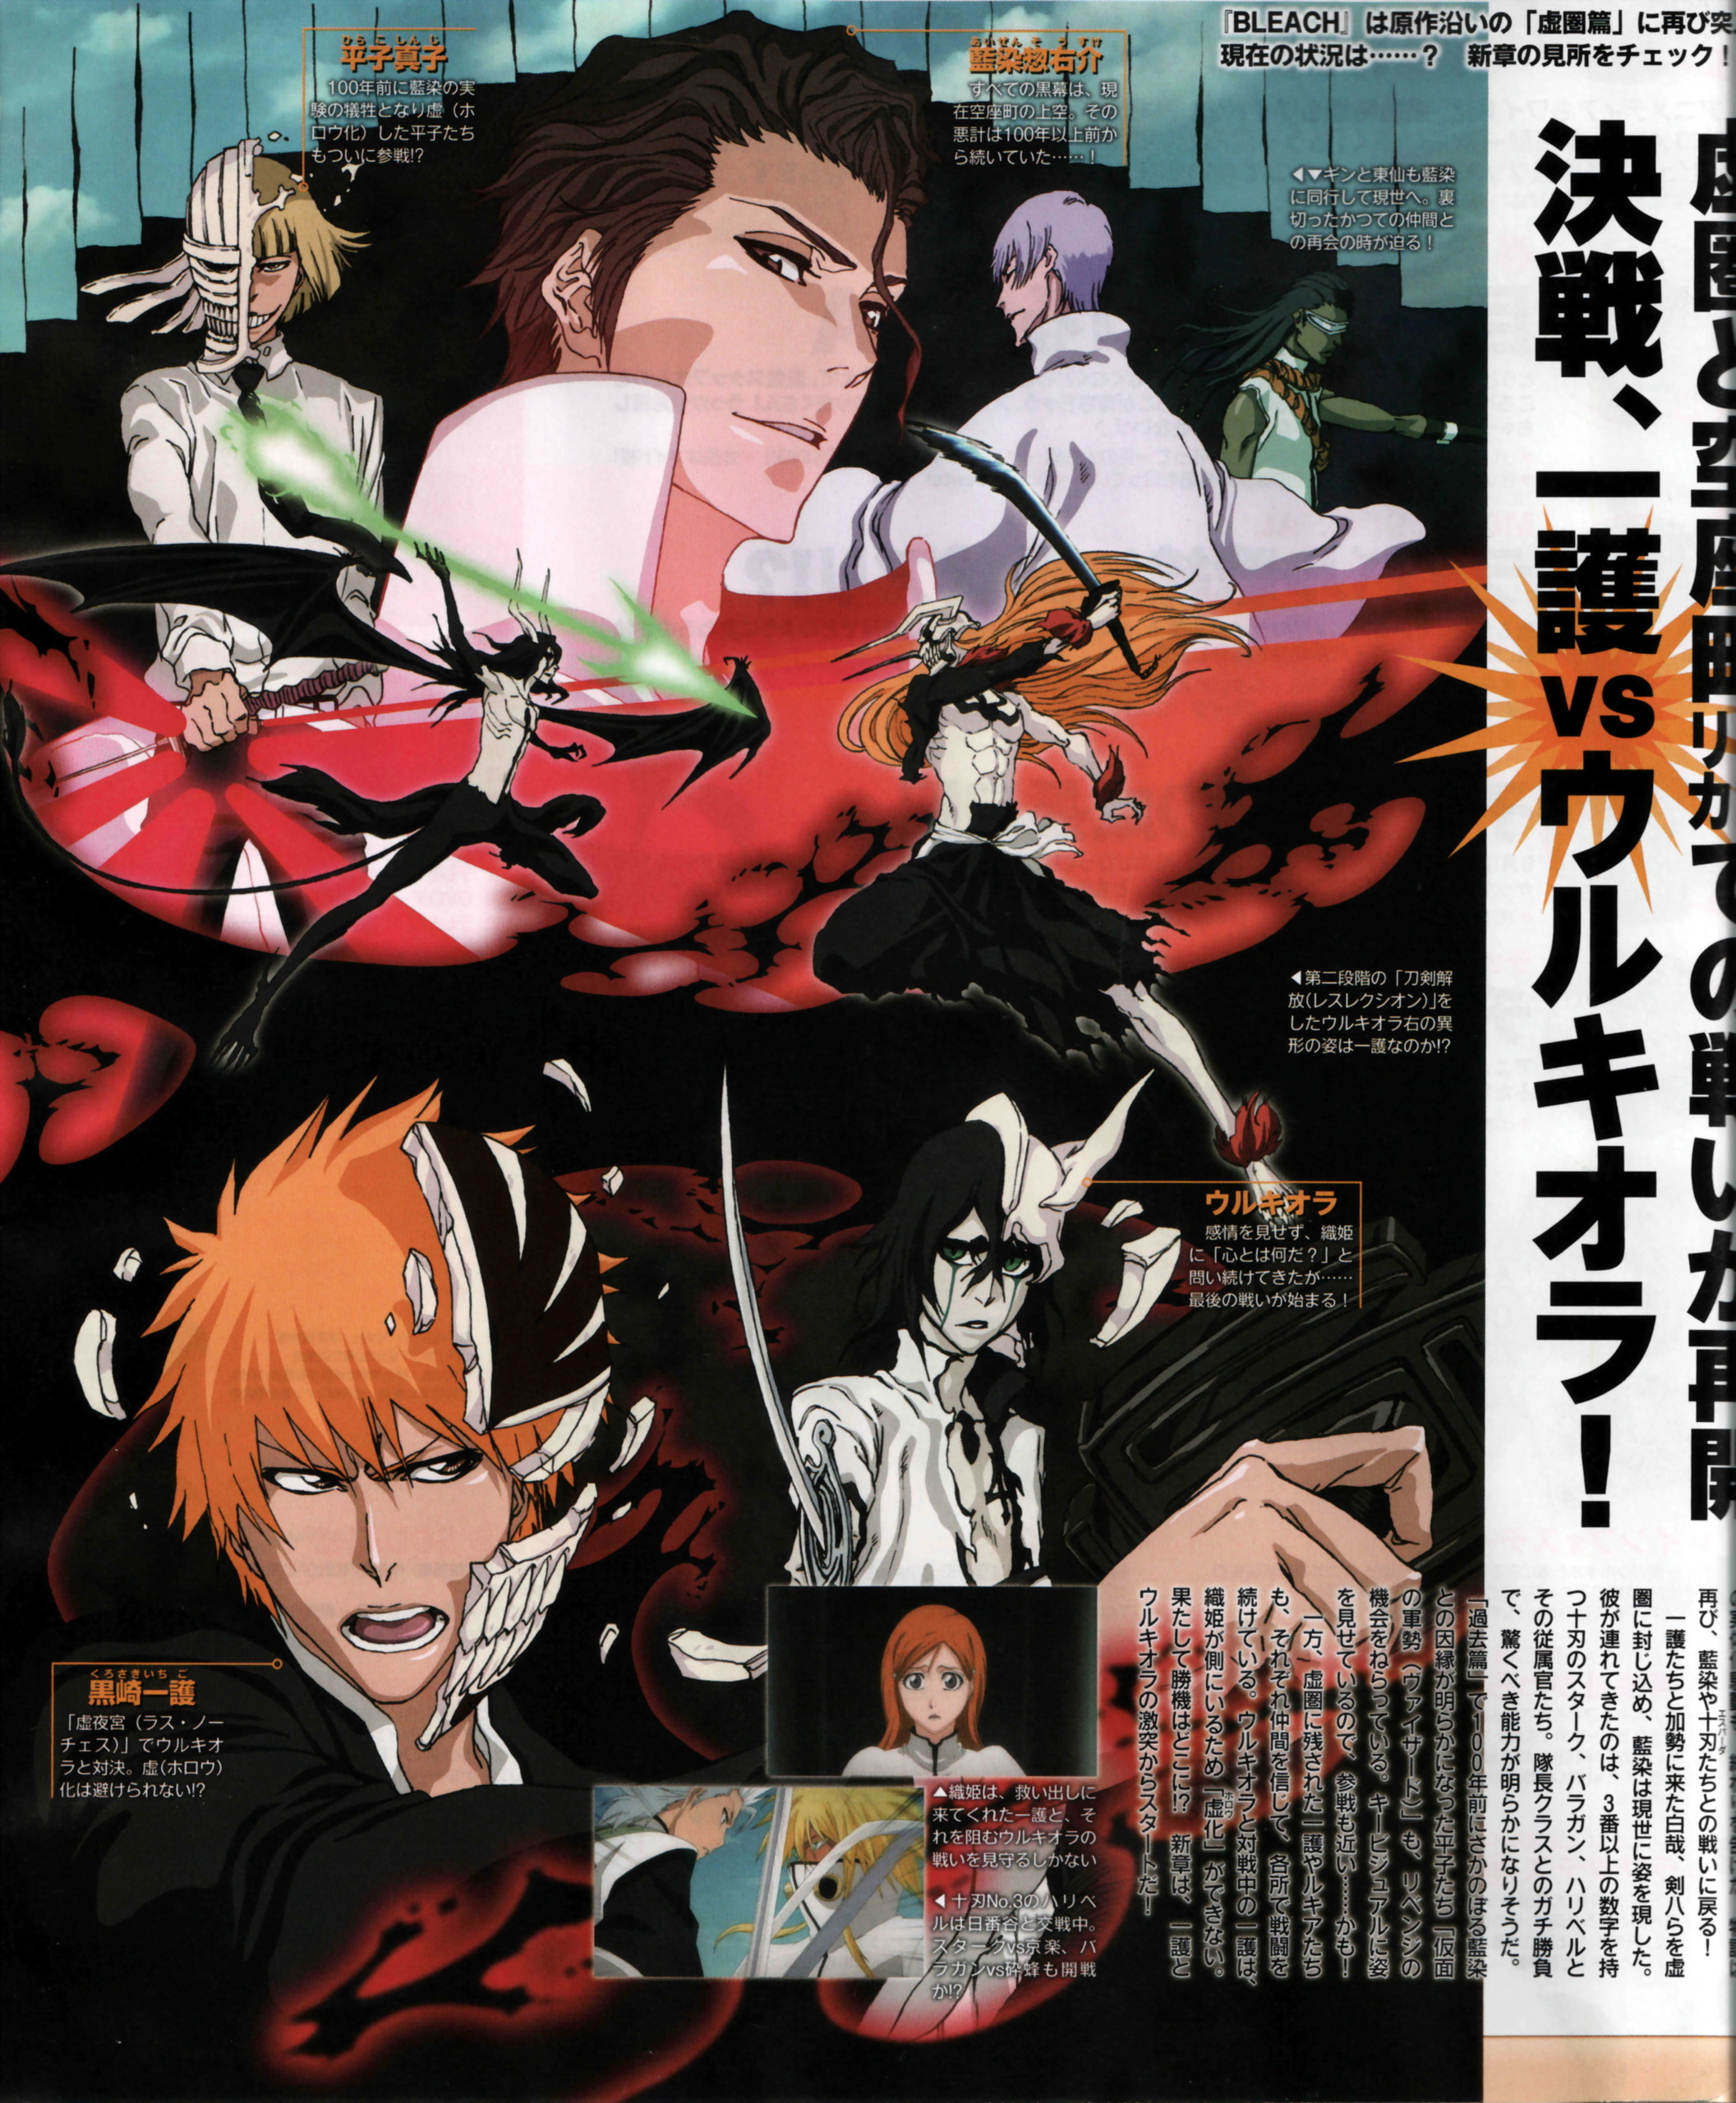 Bleach Anime Larawan Bleach Scans Hd Wolpeyper And Background Mga Litrato